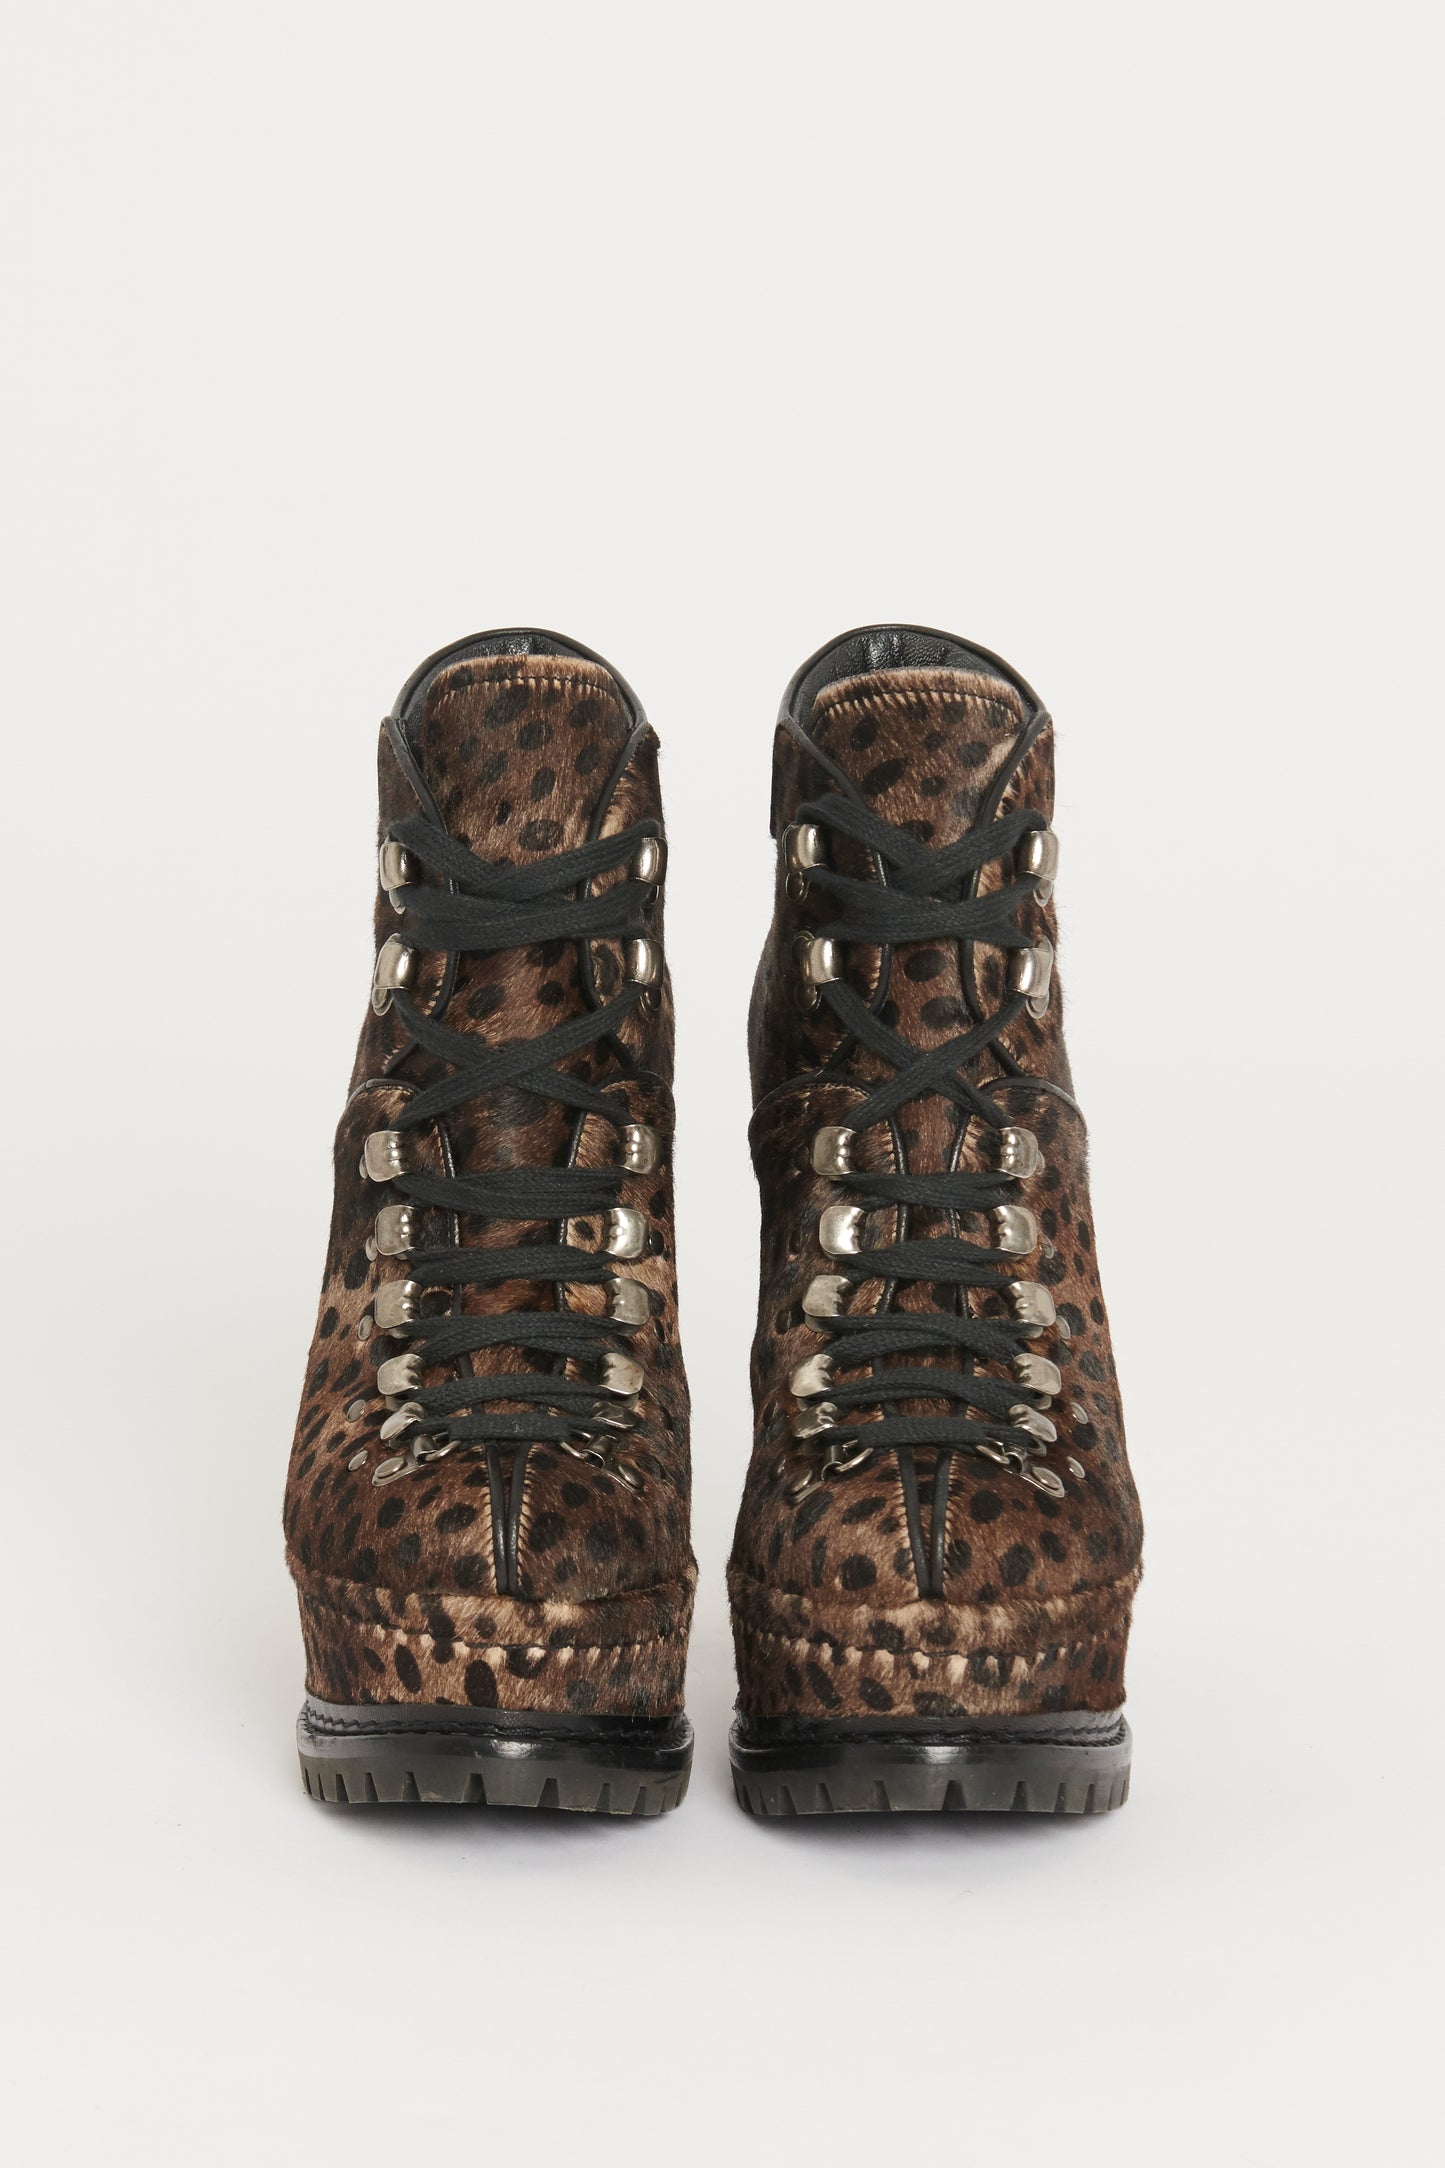 Brown Leopard Print Pony Style Preowned Ankle Boots